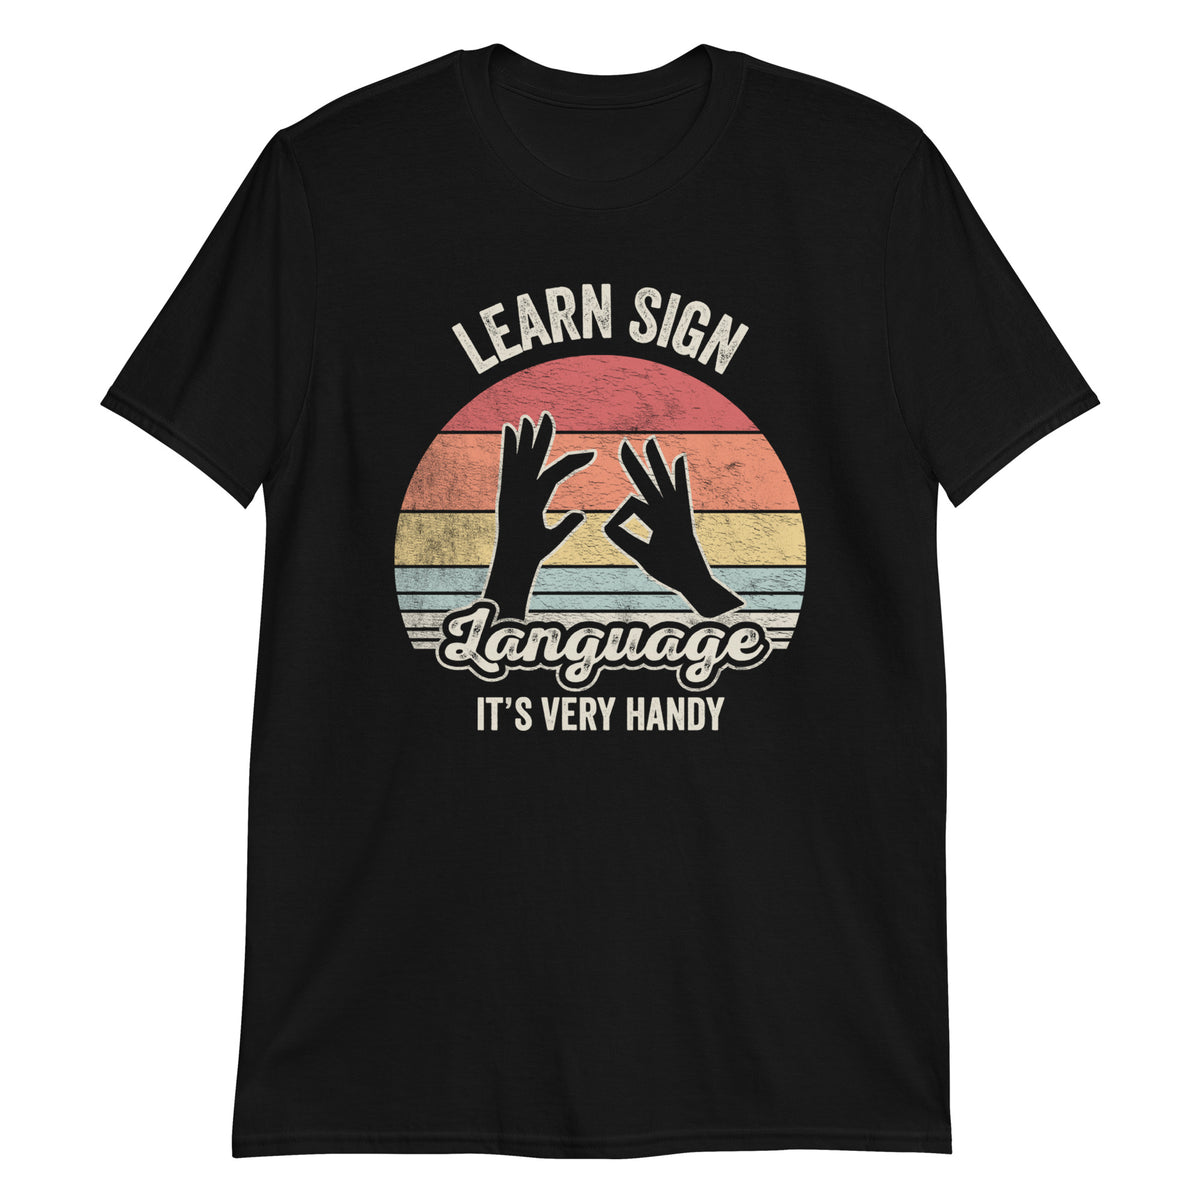 Learn Sign Language It's Very Handy T-Shirt